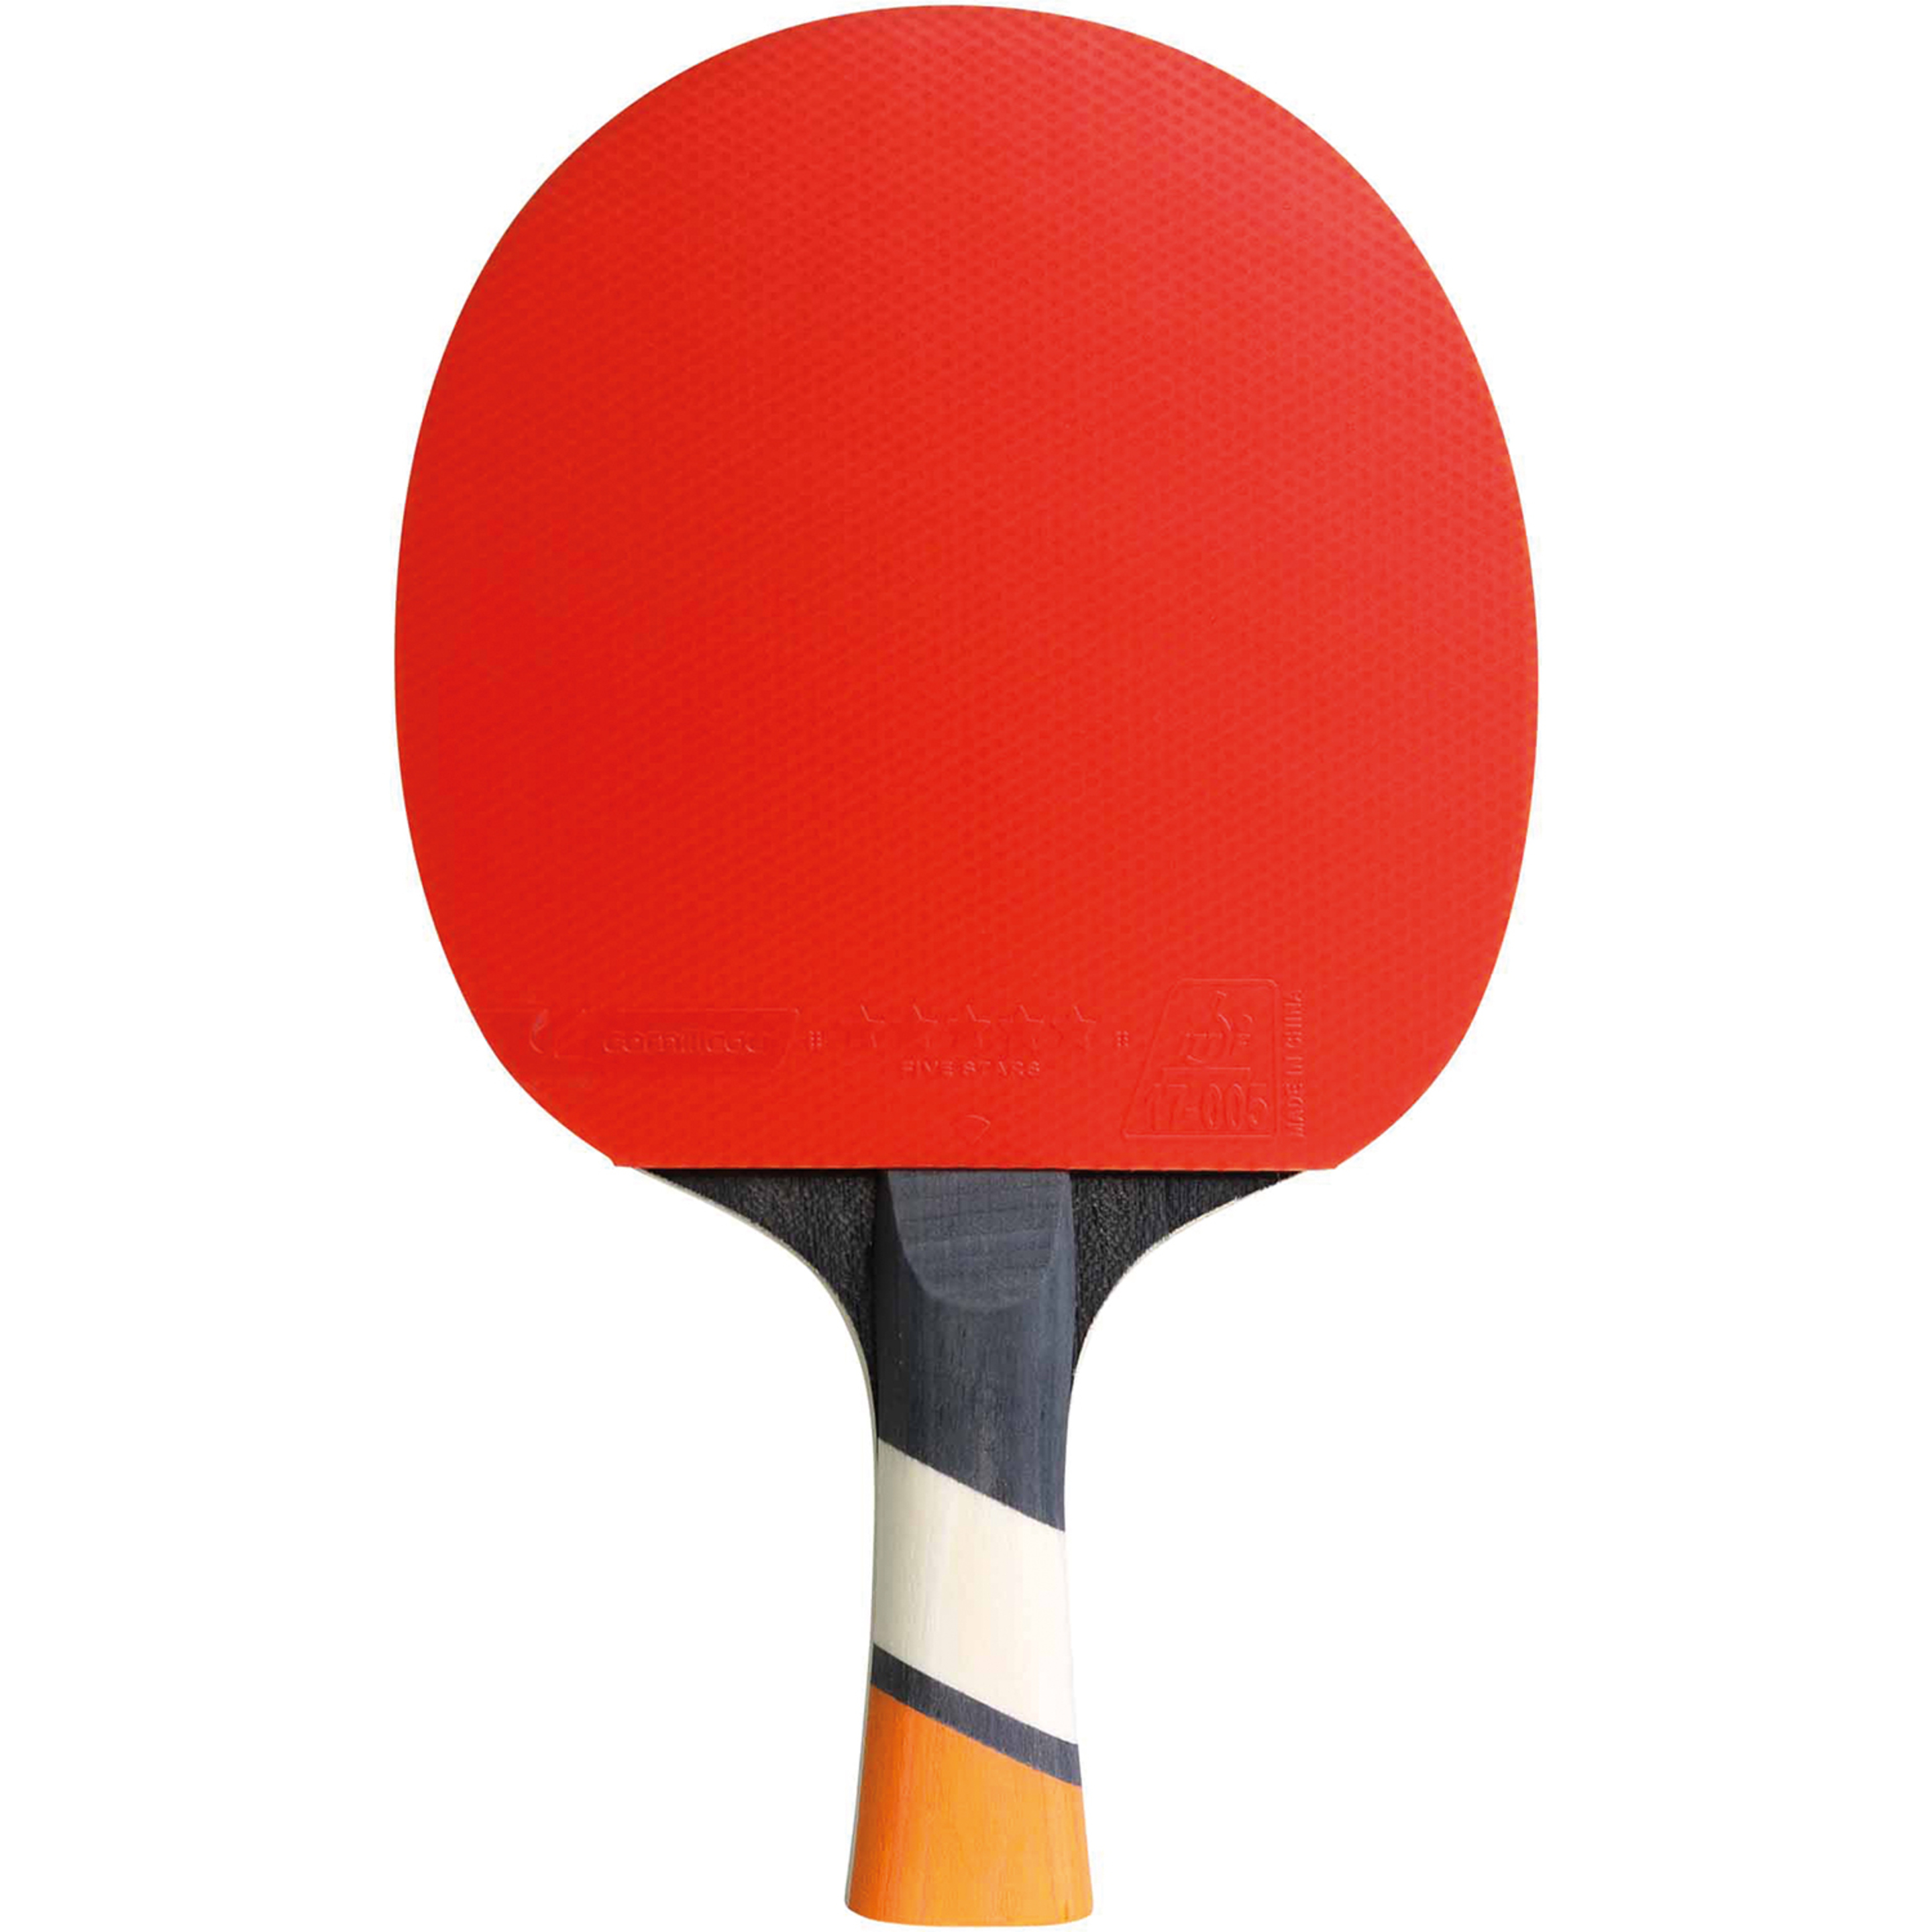 Raquete Ping Pong Cornilleau Perform 800